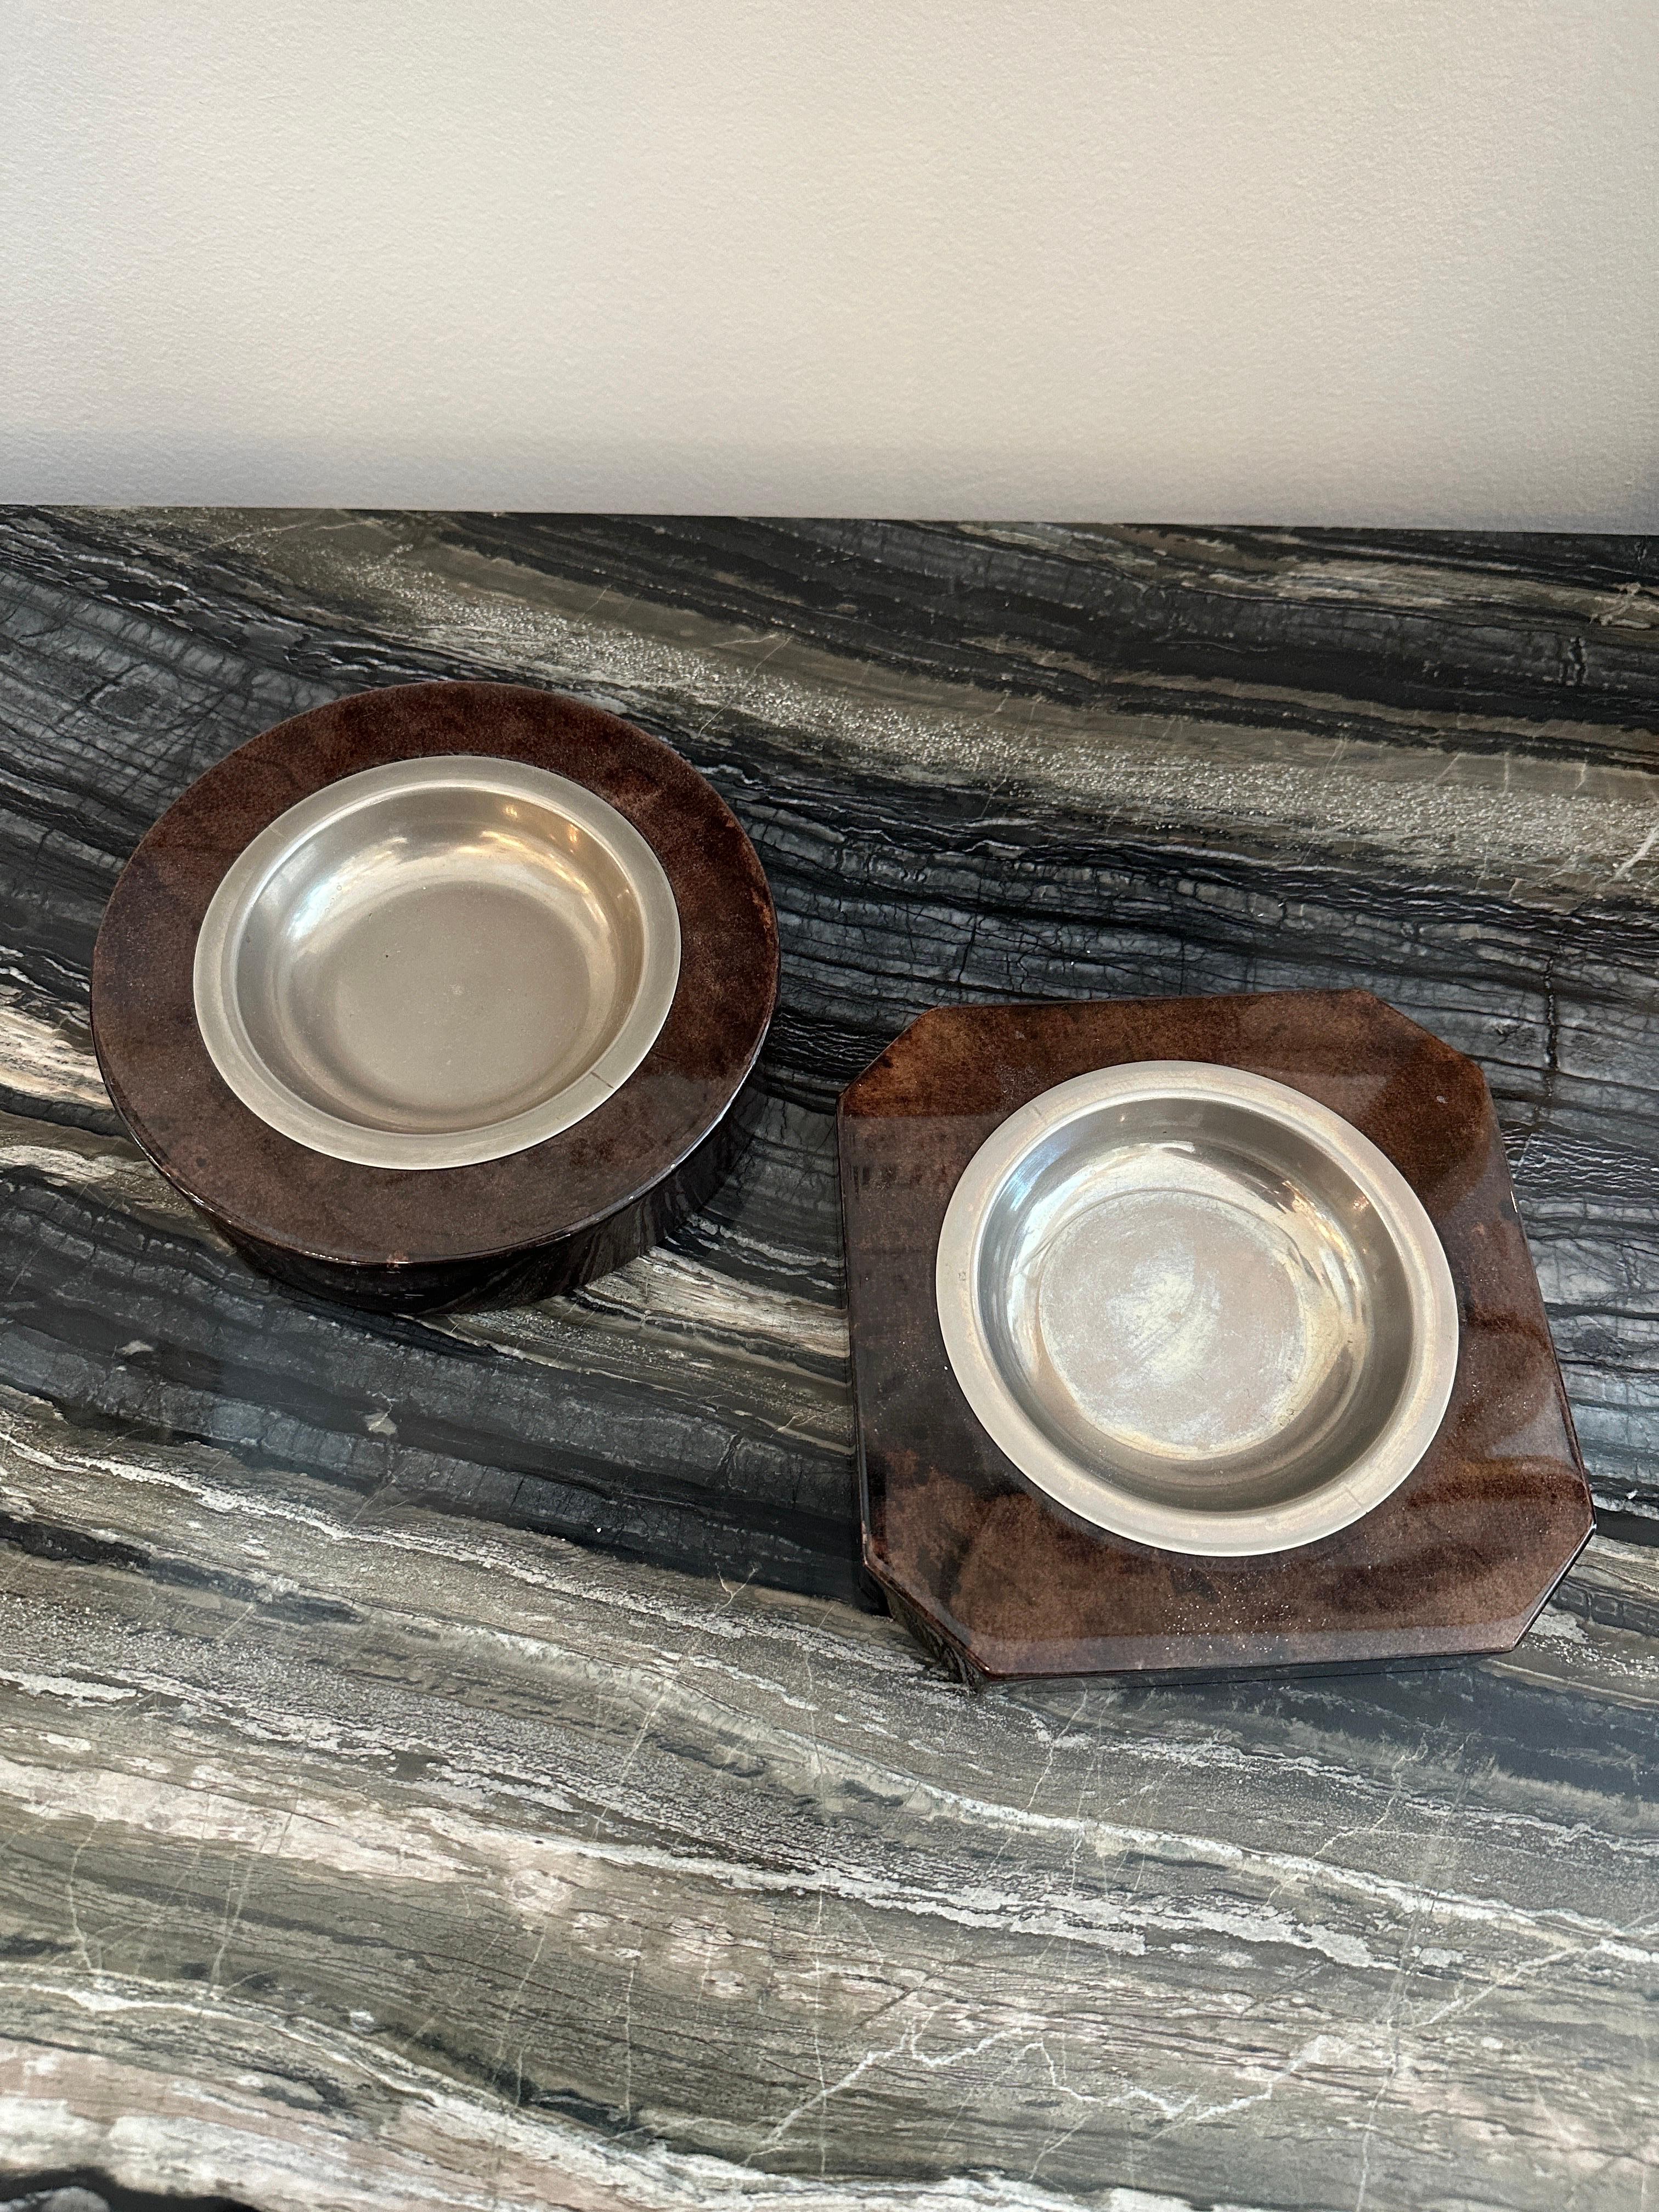 This lovely pair of rich brown goatskin clad small bowls in two geometric designs by Aldo Tura, Italy.  THIS ITEM IS LOCATED AND WILL SHIP FROM OUR EAST HAMPTON, NY SHOWROOM.

Square bowl is 6.25 x 6.25, 1 inch tall